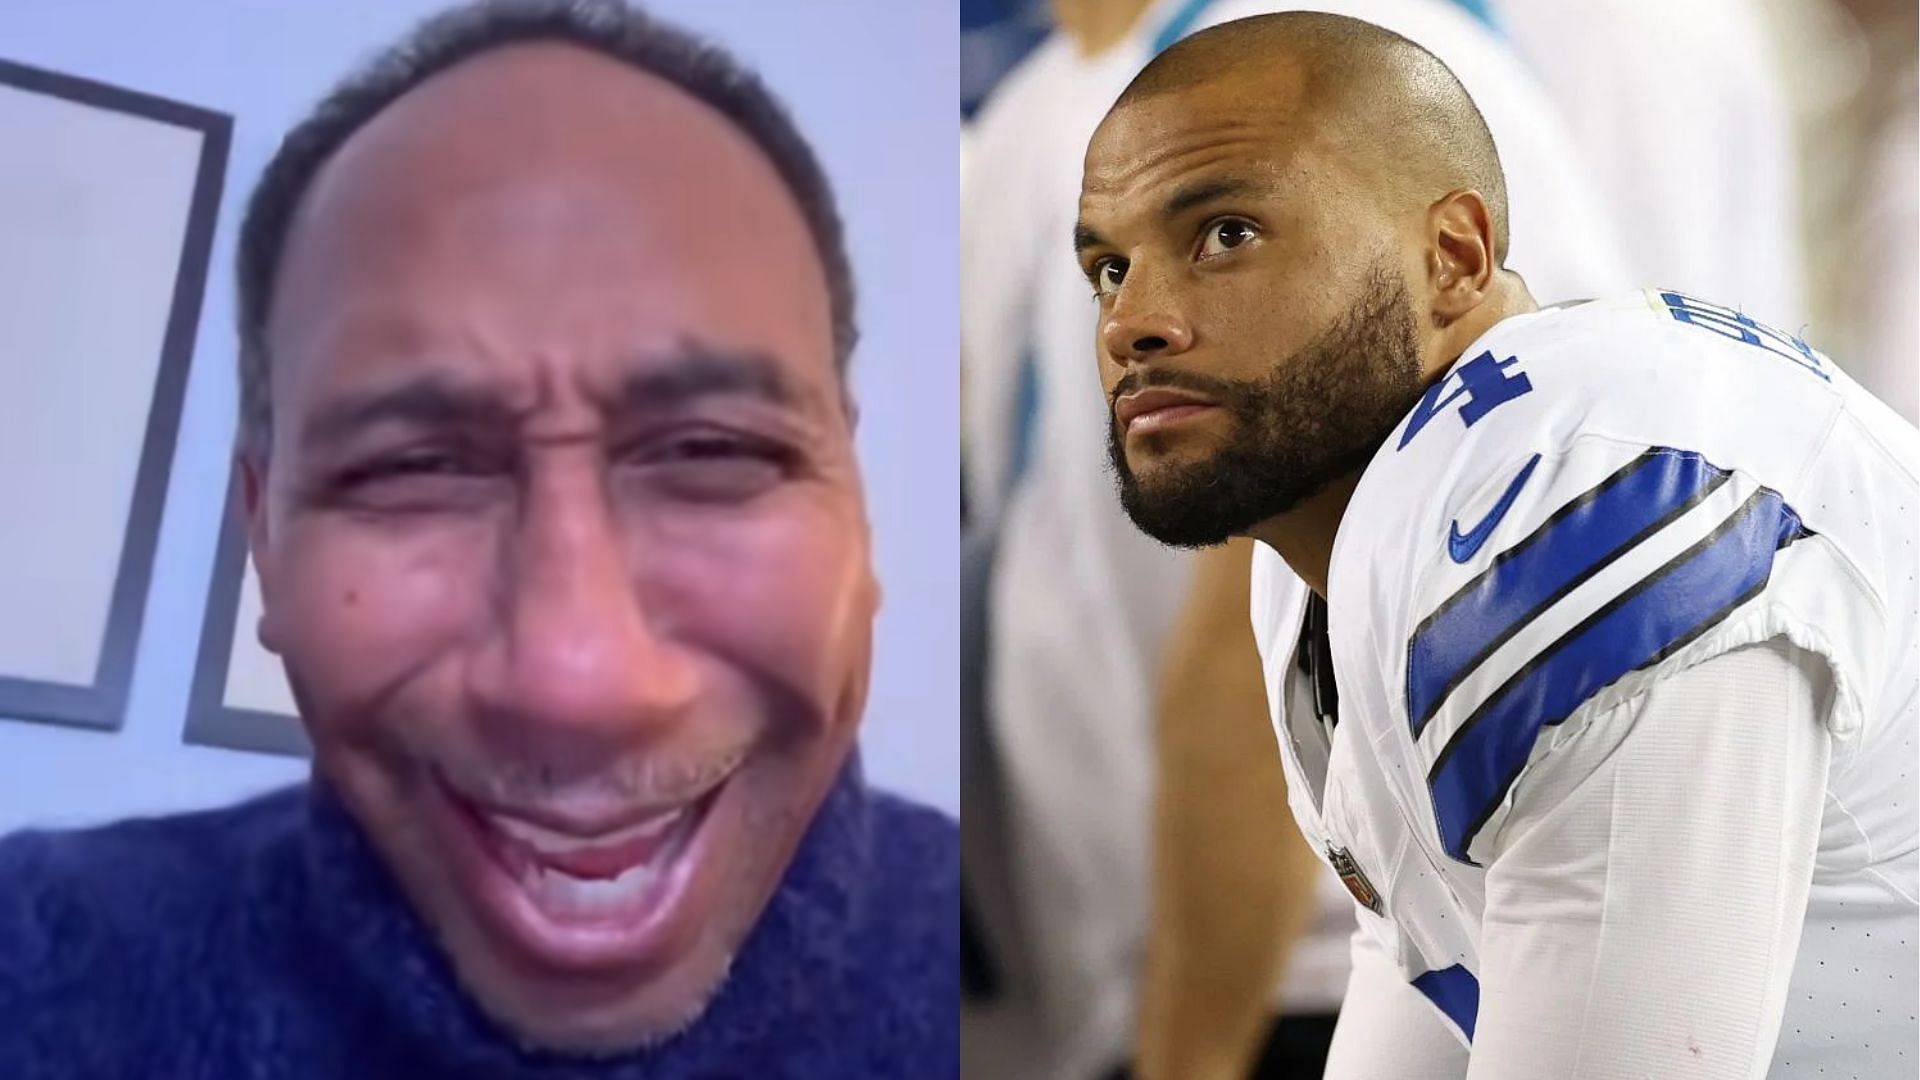 Stephen A Smith and Dak Prescott (Image credit: Stephen A. Smith on Facebook)